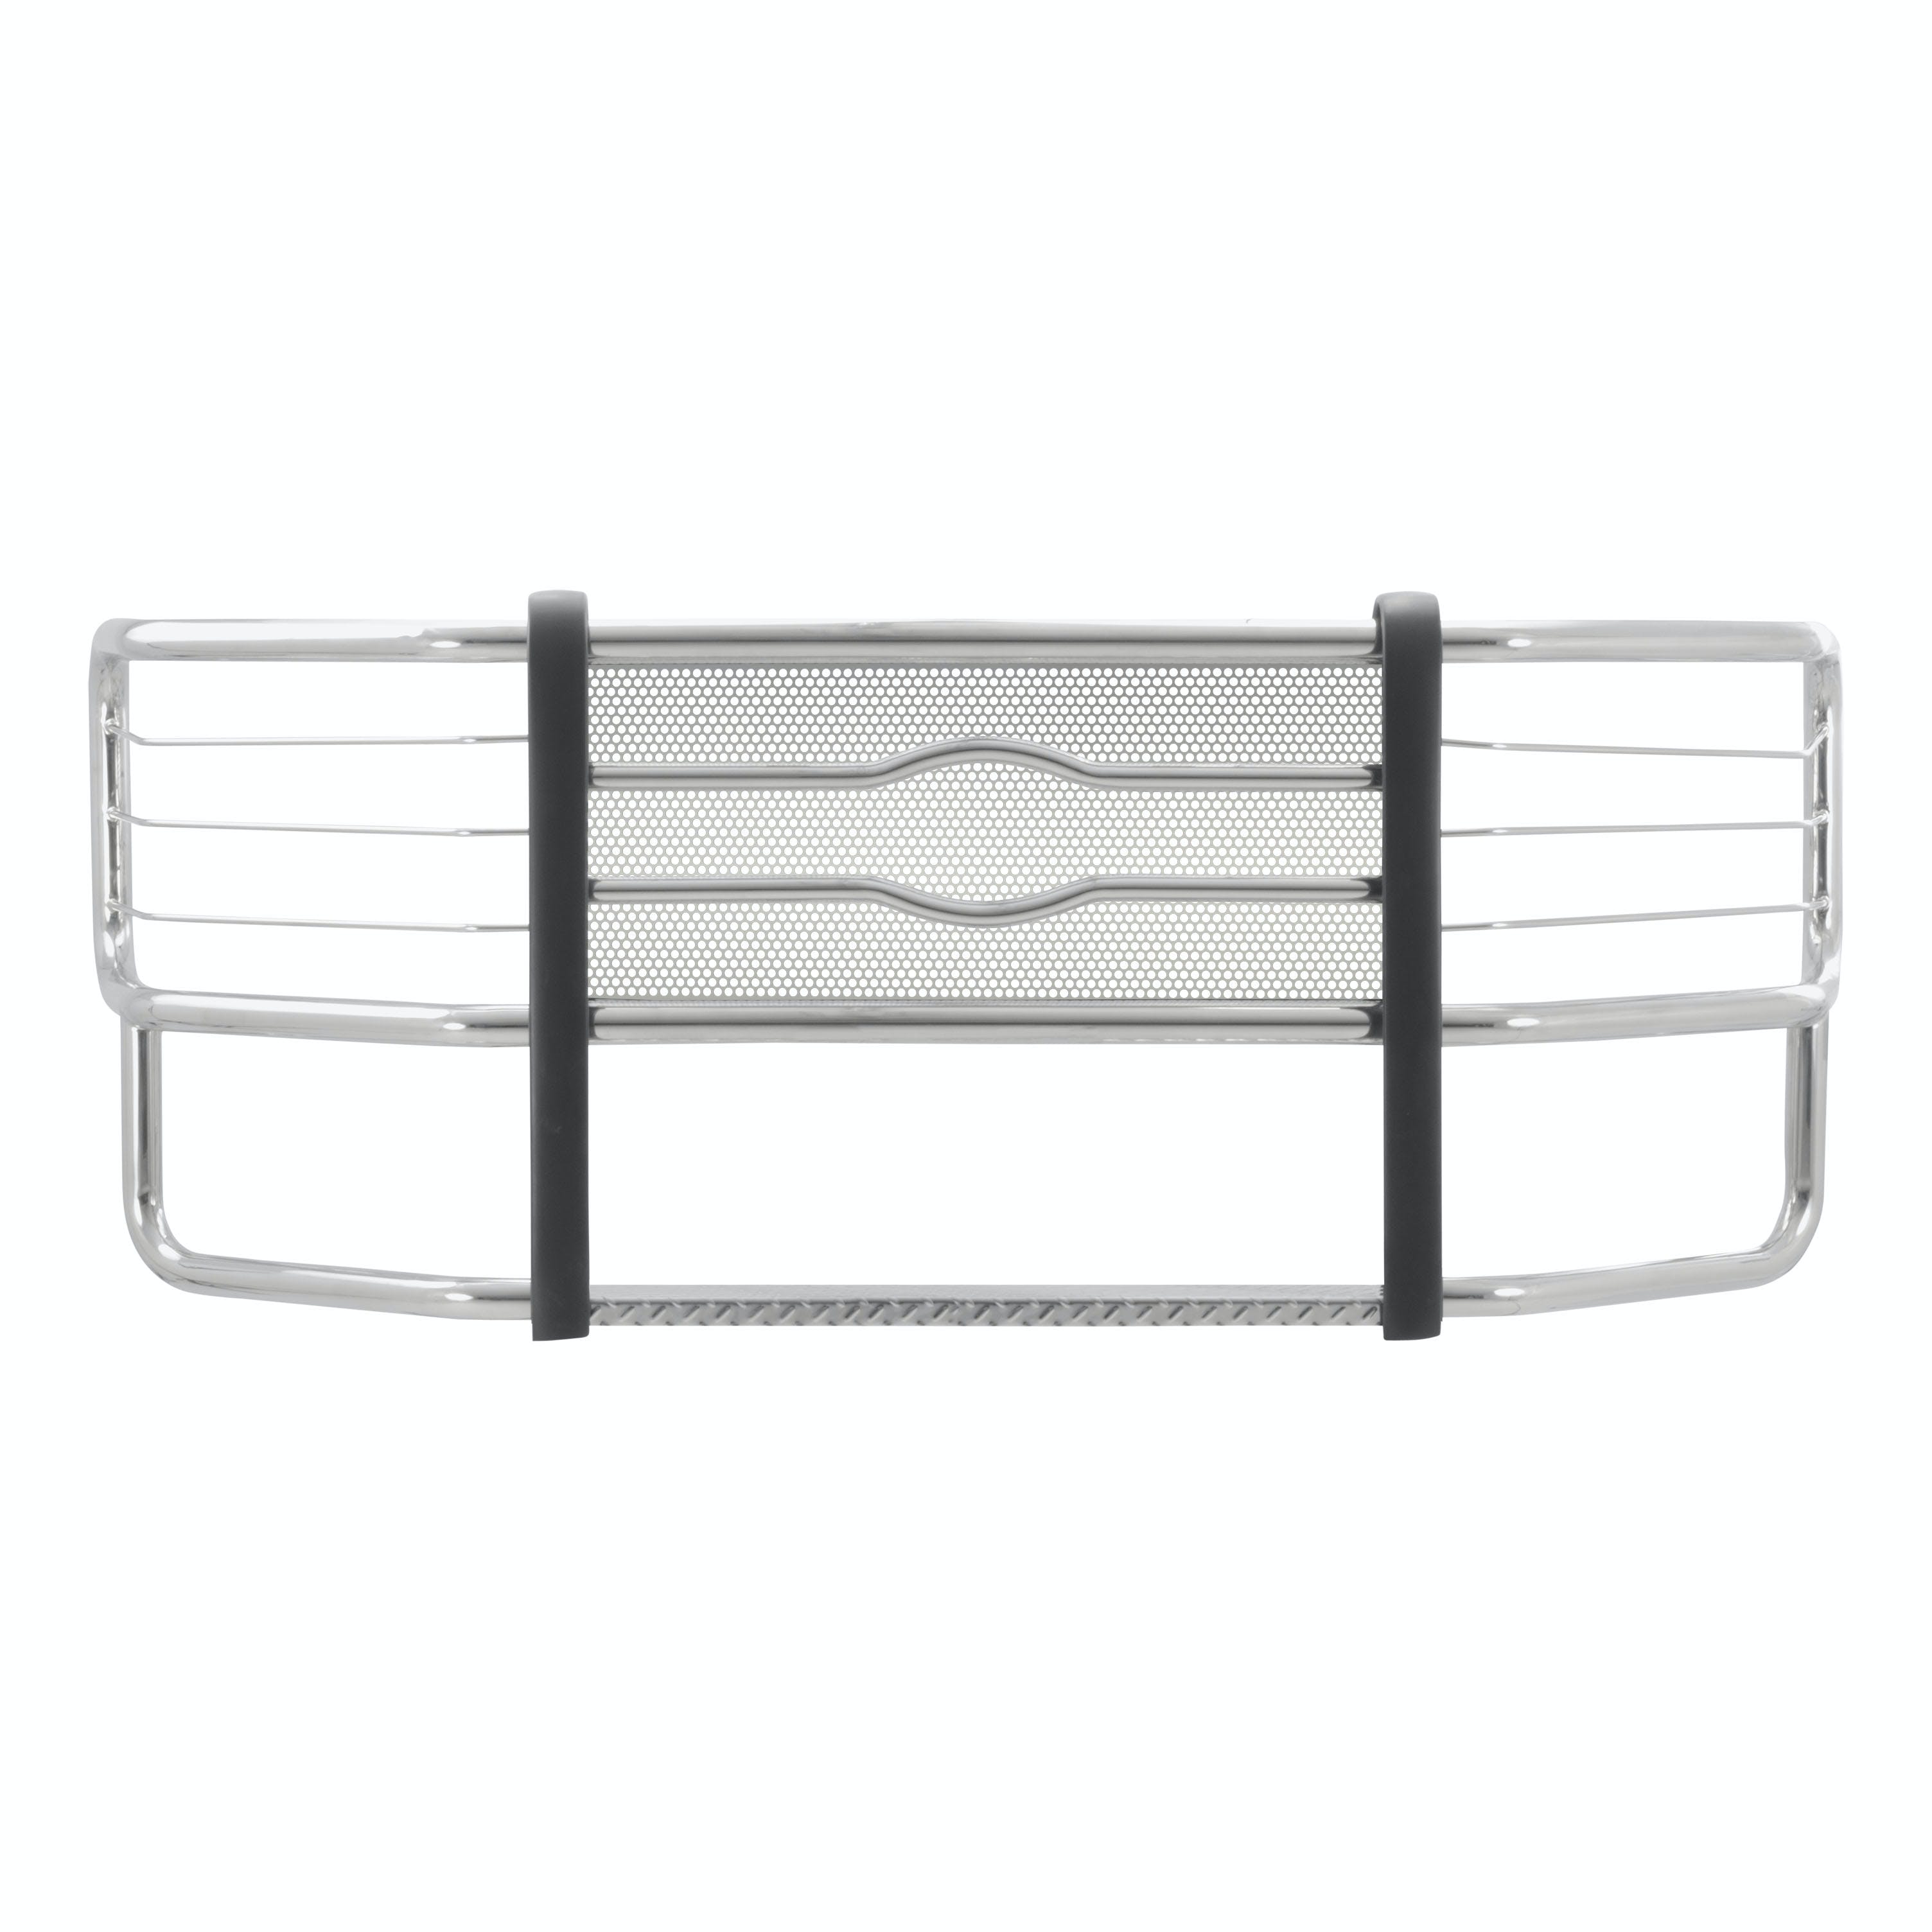 LUVERNE 311123 Prowler Max Grille Guard